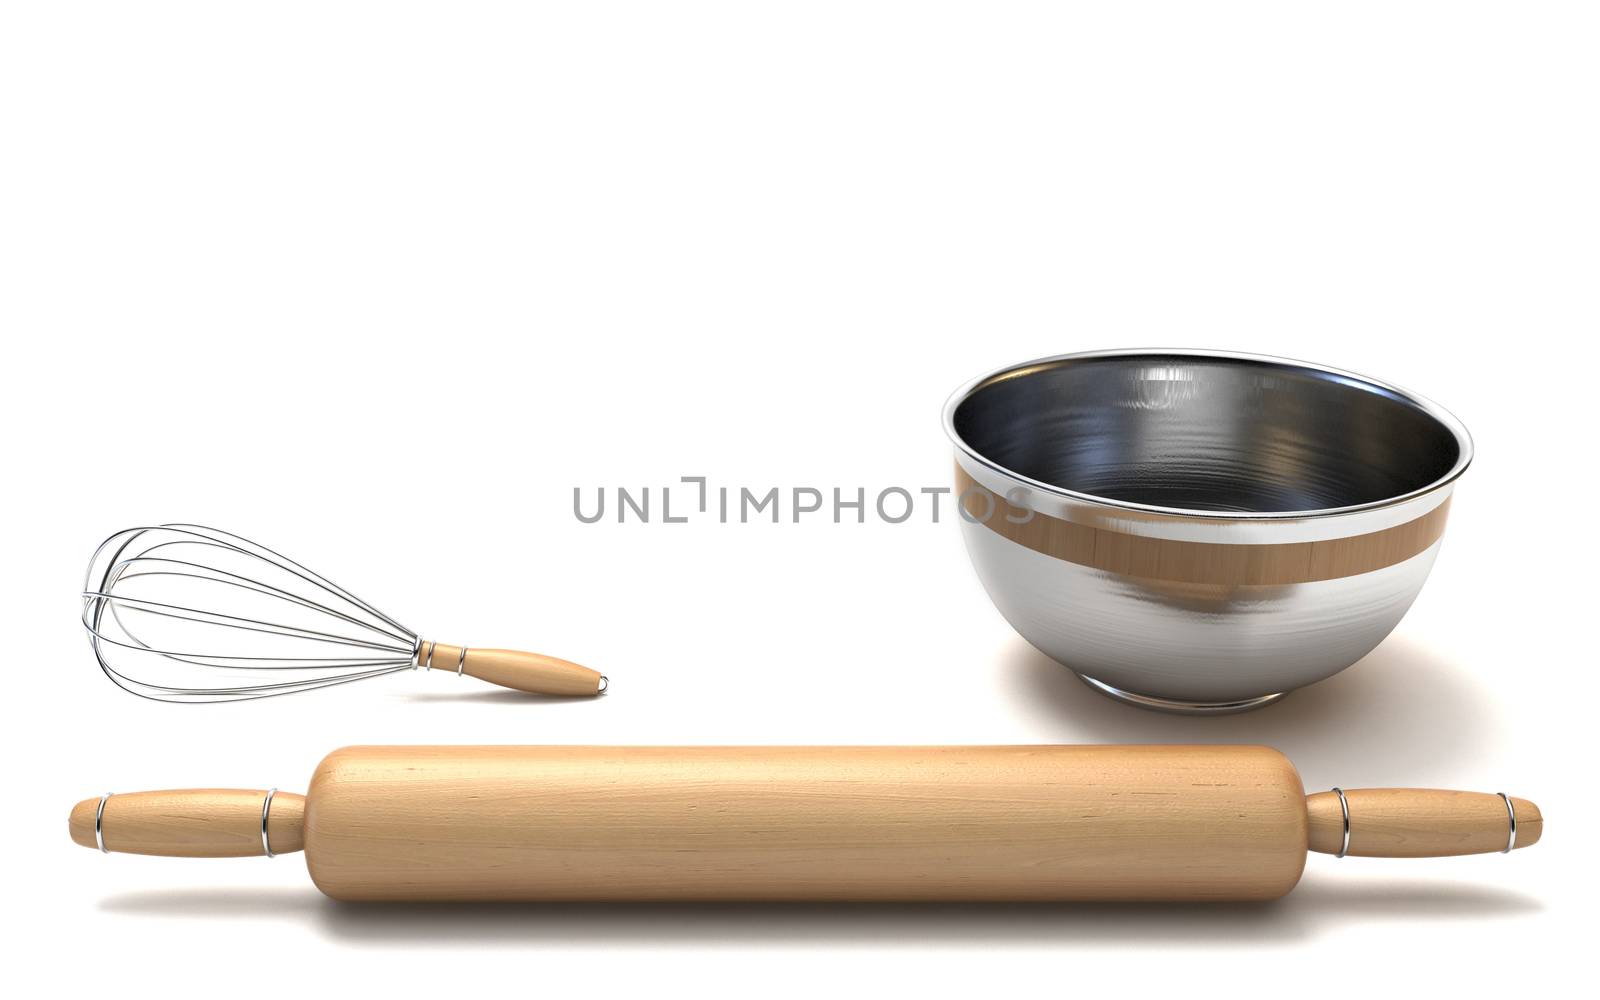 Wire whisk, wooden rolling pin and chrome bowl 3D render illustration isolated on white background